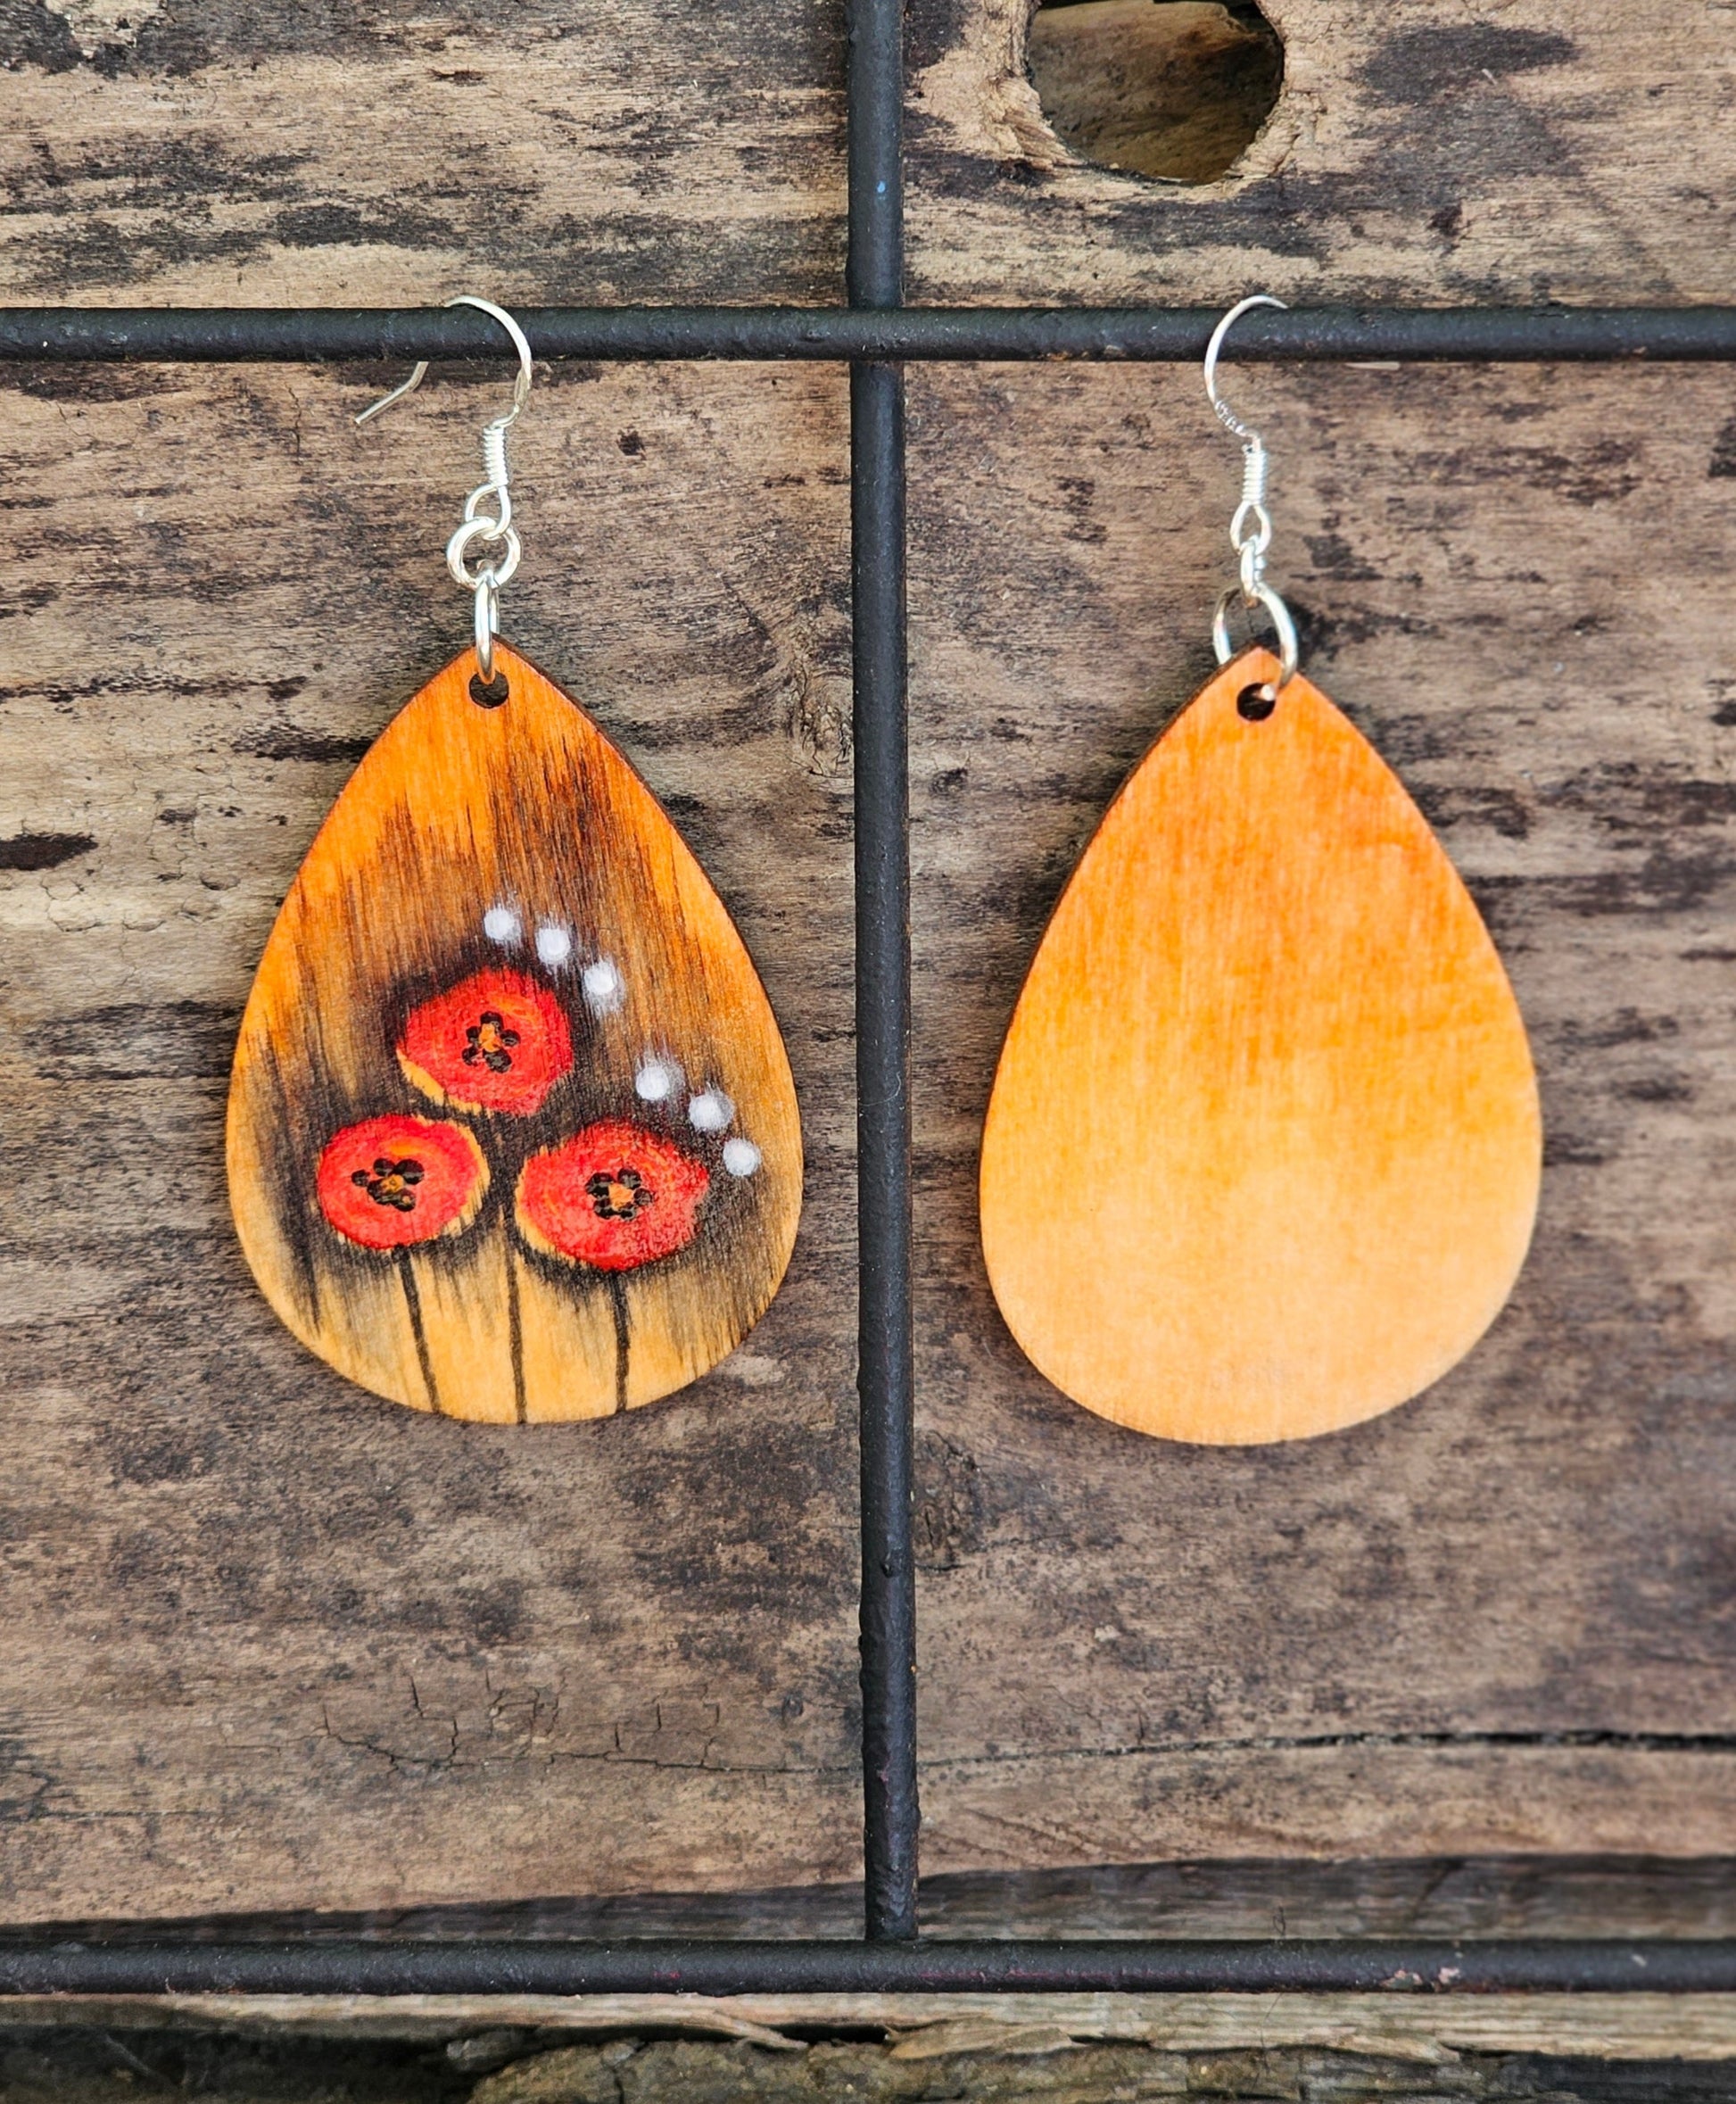 Hand Painted Ultra Lightweight Wooden Earrings. Watercolor and Acrylic.  Pale Orange colored  background. Trio of Red Poppies, black shadows and white accent dot design. Teardrop in shape. Back is painted in complimentary color. Sterling Silver Findings. Hangs 2 1/4" in Length